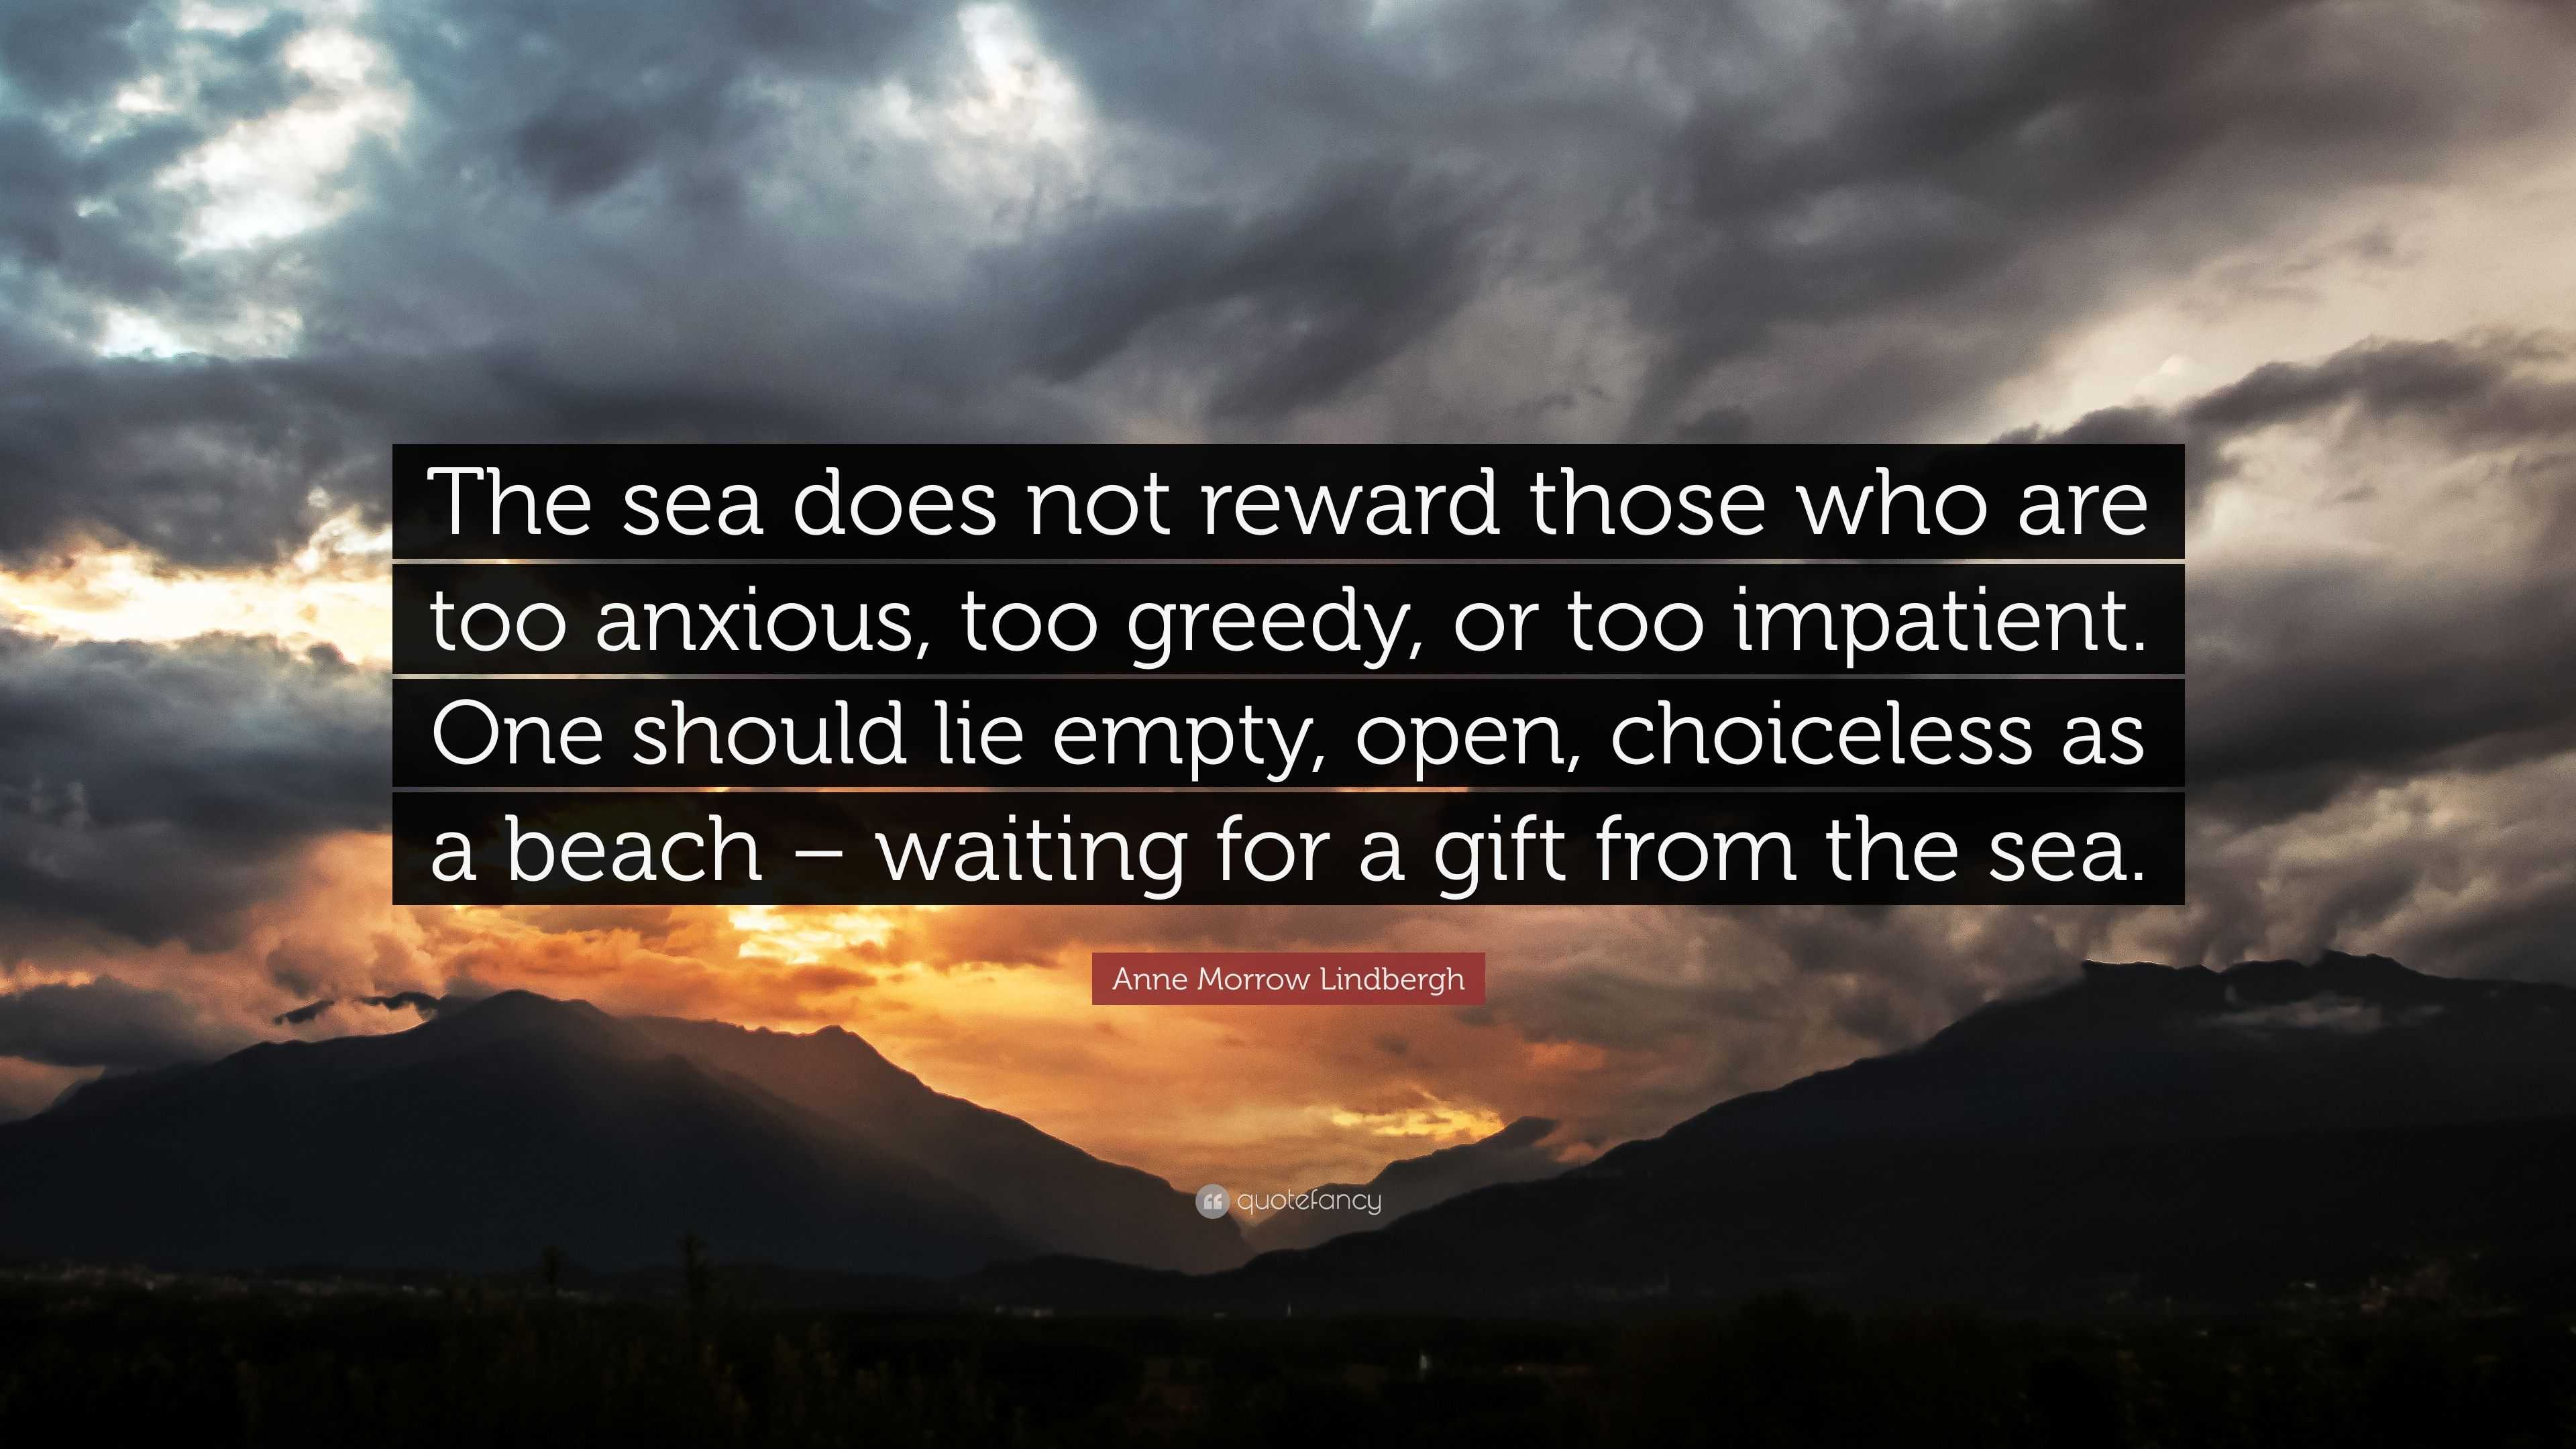 gift from the sea by anne morrow lindbergh